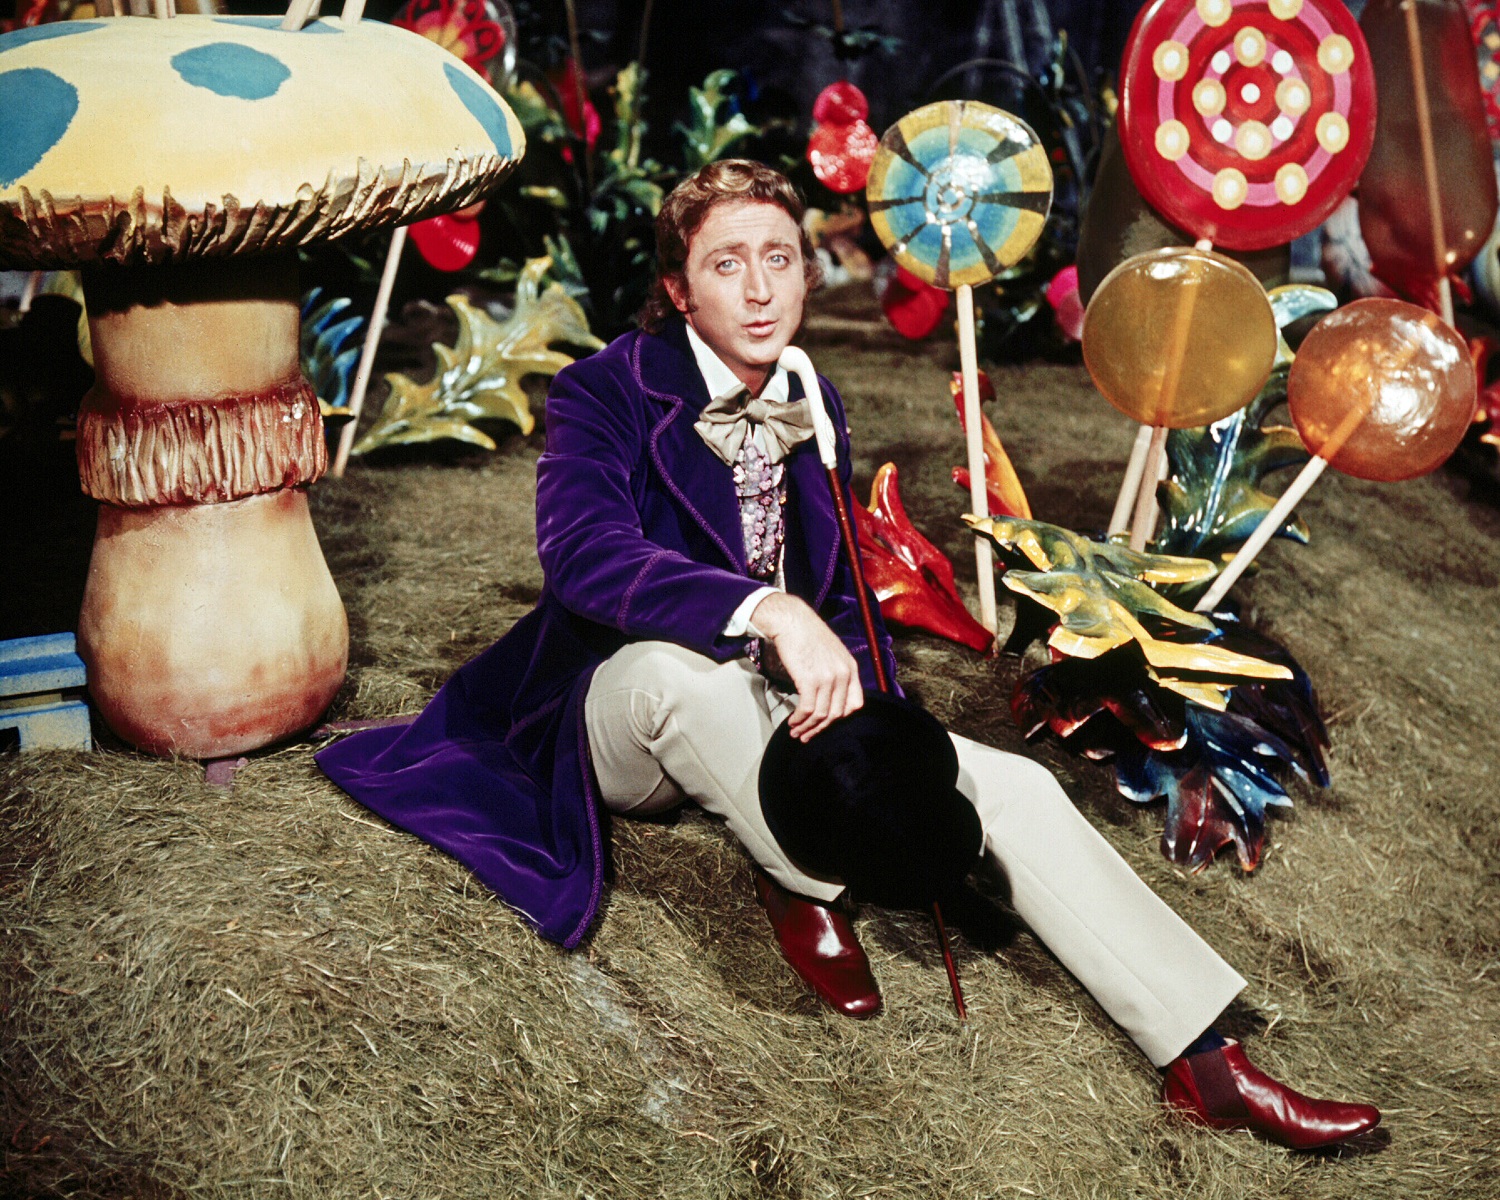 Gene Wilder as Willy Wonka in the film Willy Wonka & the Chocolate Factory